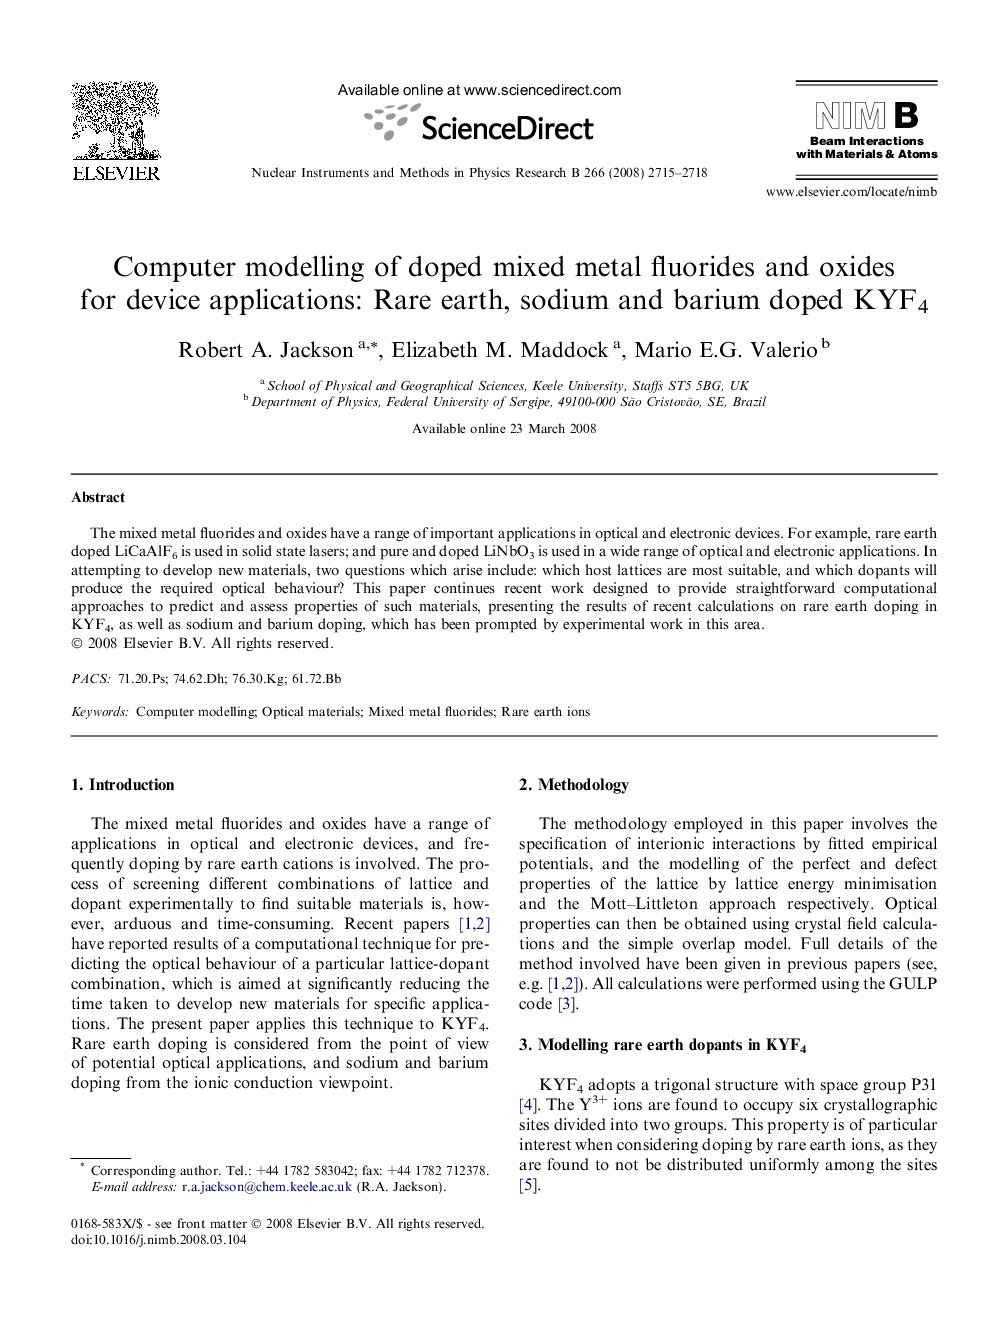 Computer modelling of doped mixed metal fluorides and oxides for device applications: Rare earth, sodium and barium doped KYF4